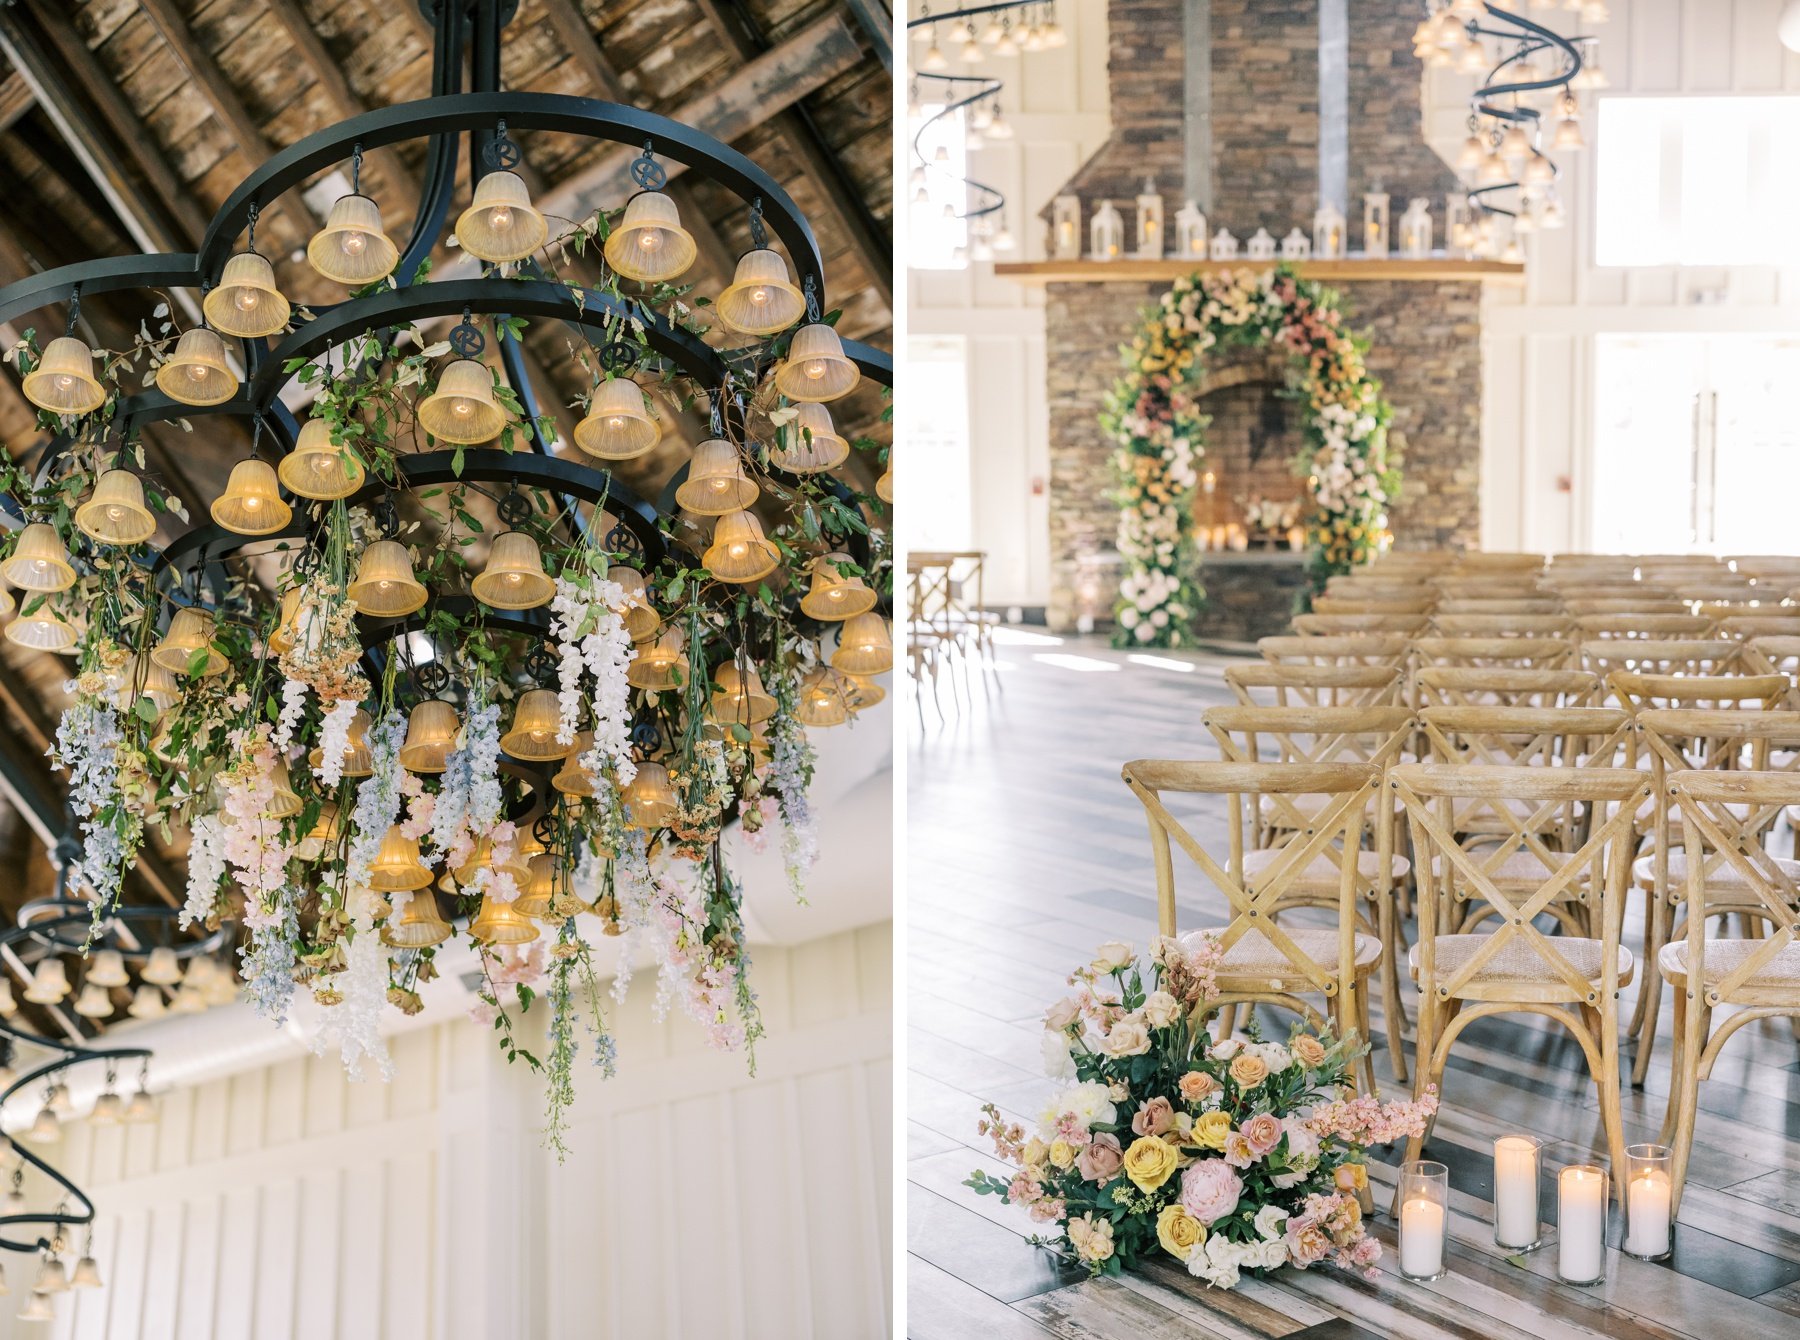 Hanging flower chandelier with snapdragons at a wedding ceremony